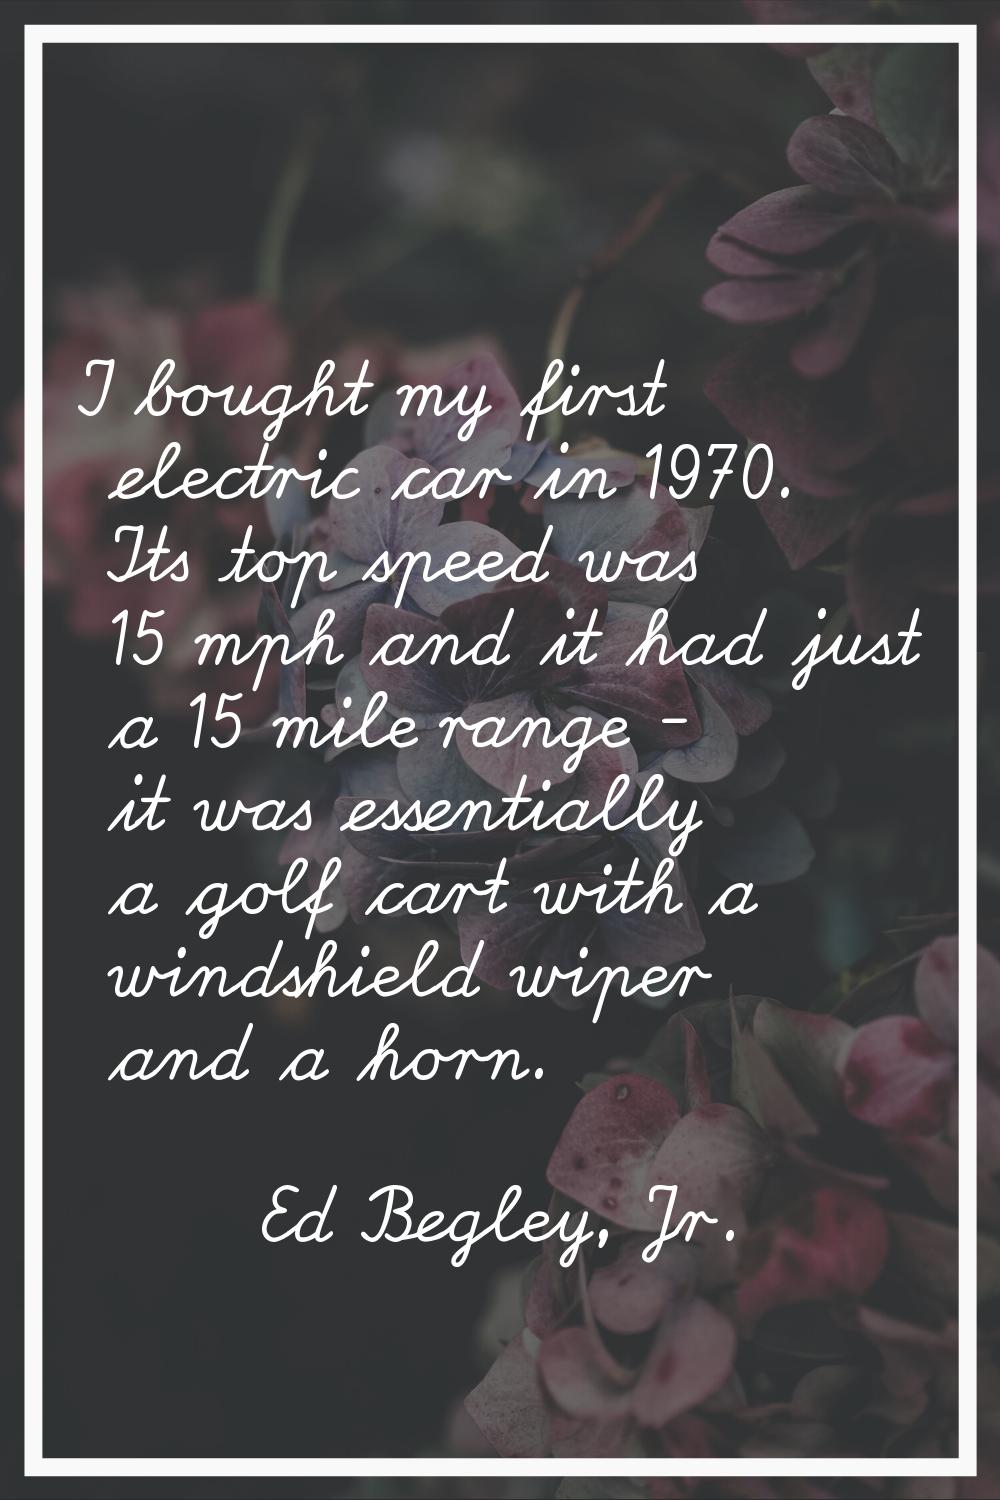 I bought my first electric car in 1970. Its top speed was 15 mph and it had just a 15 mile range - 